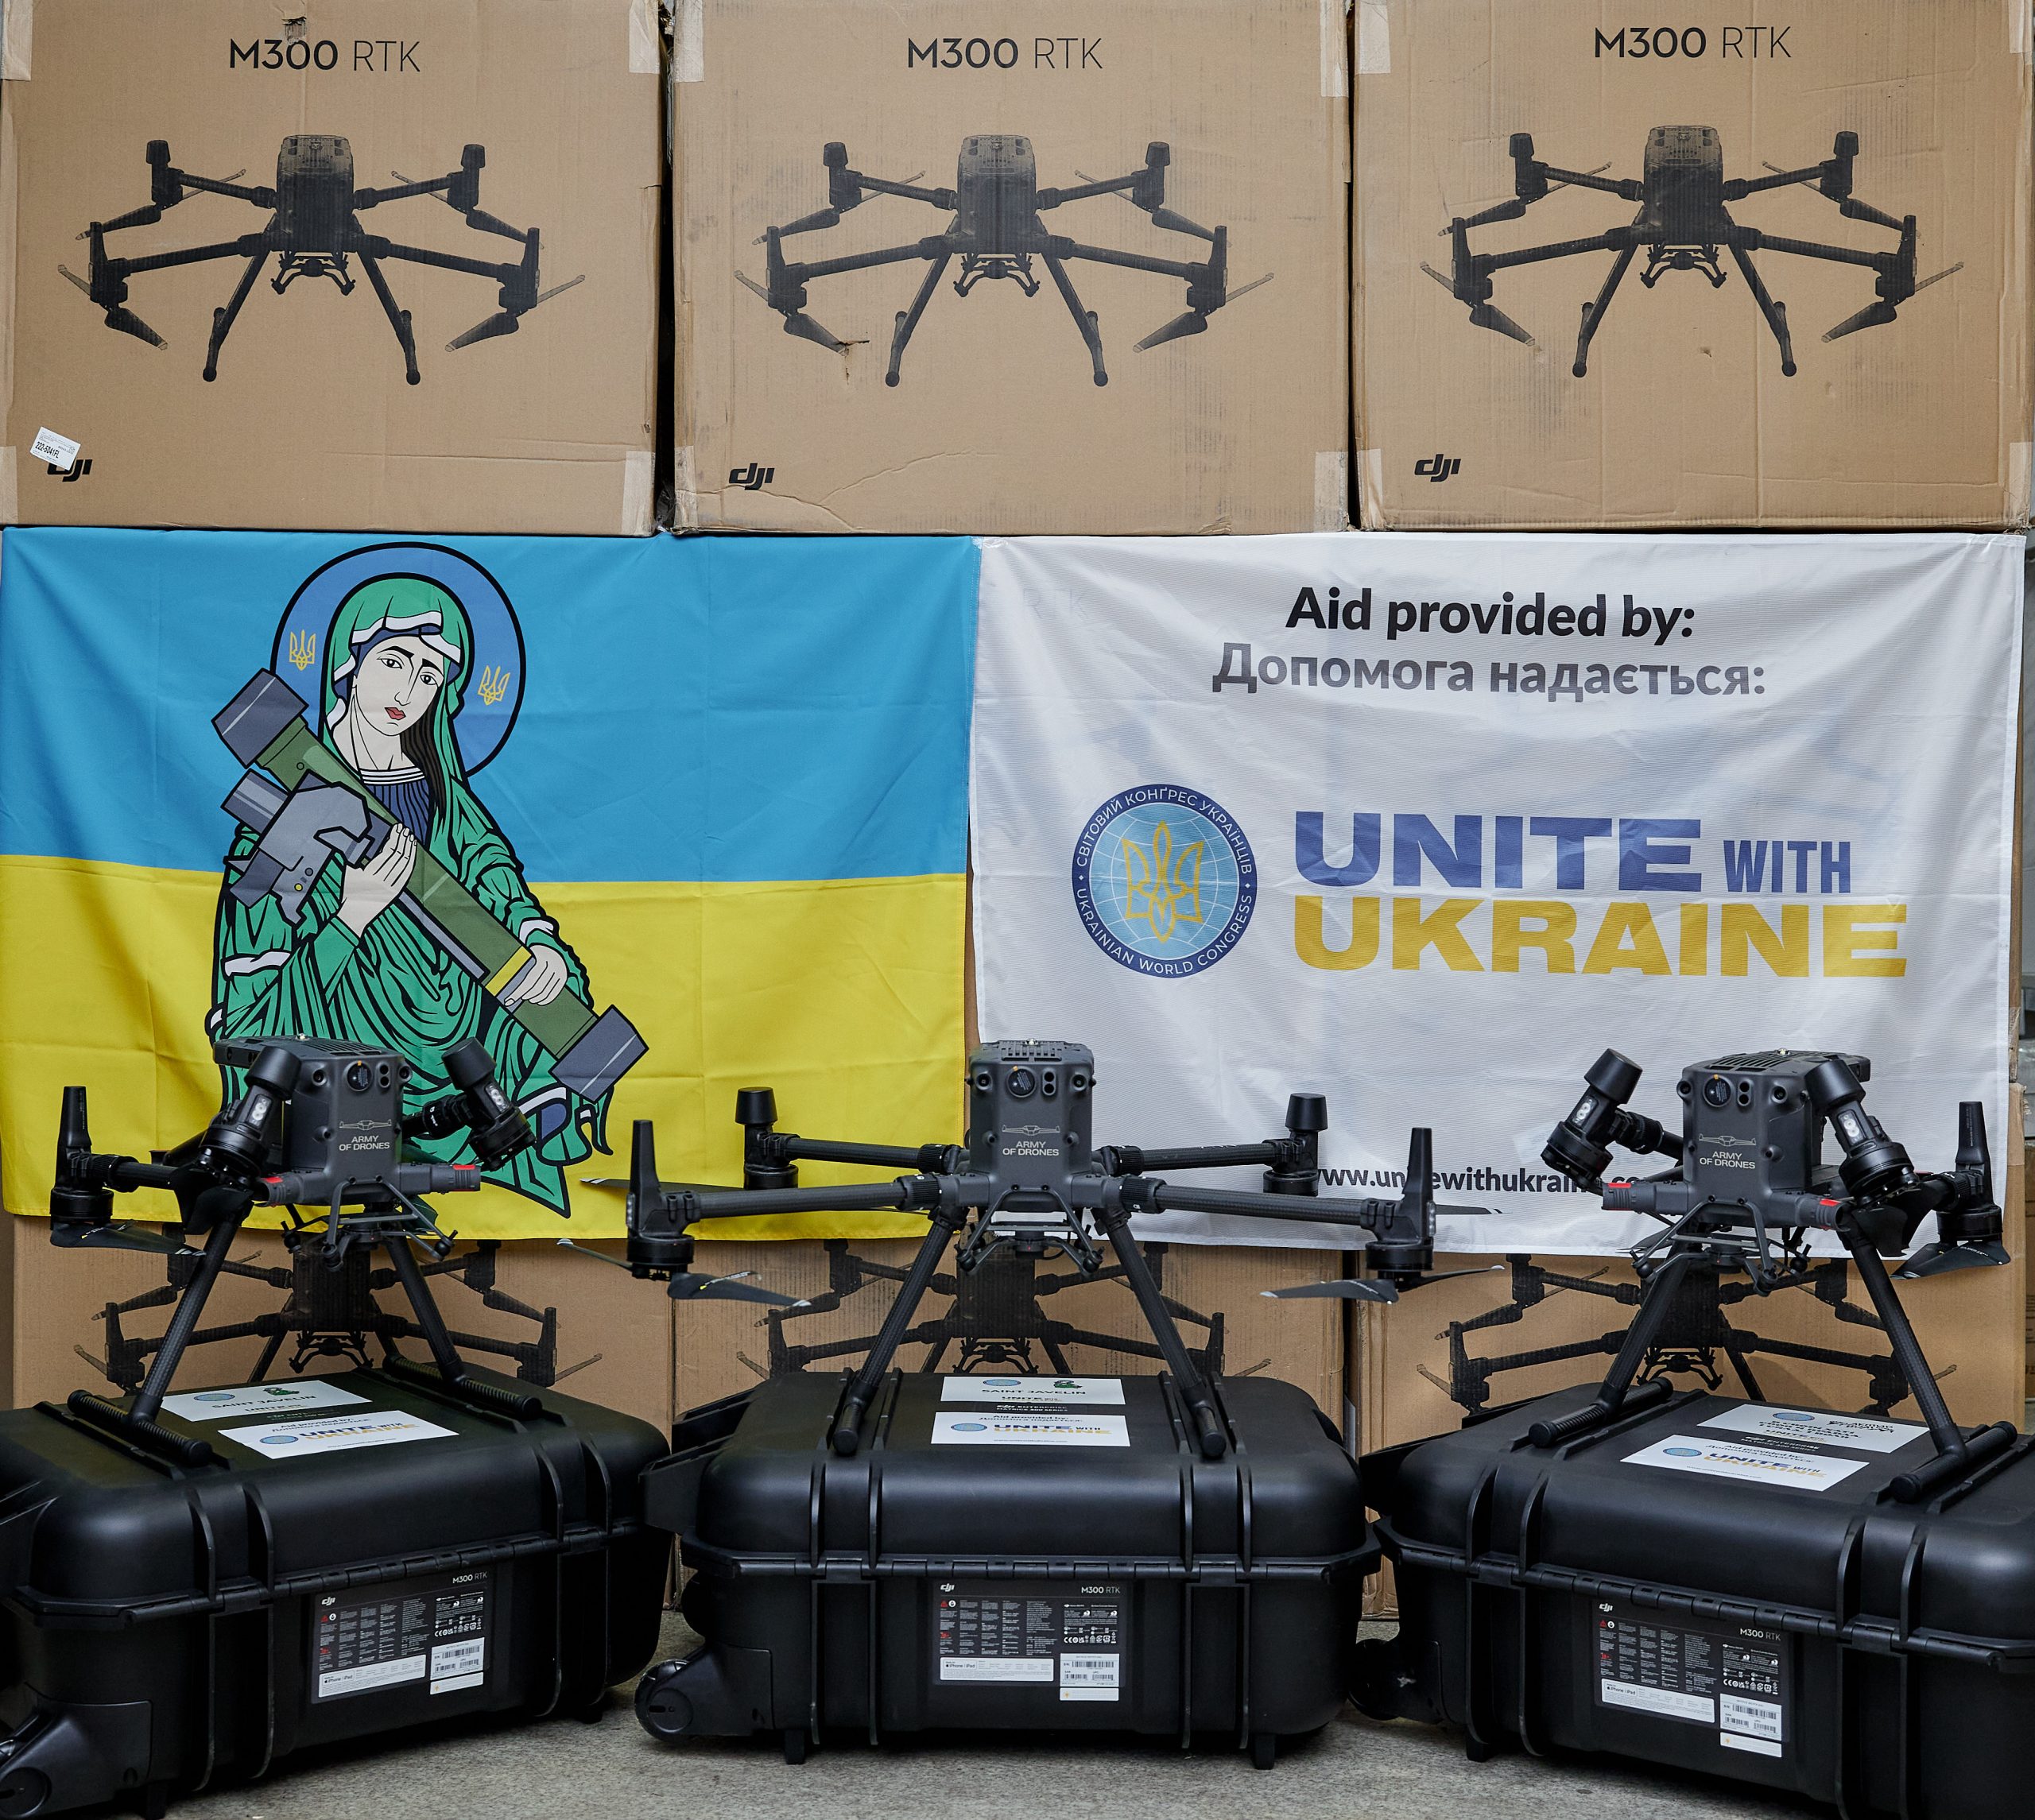 army-of-drones-4-scaled.jpg